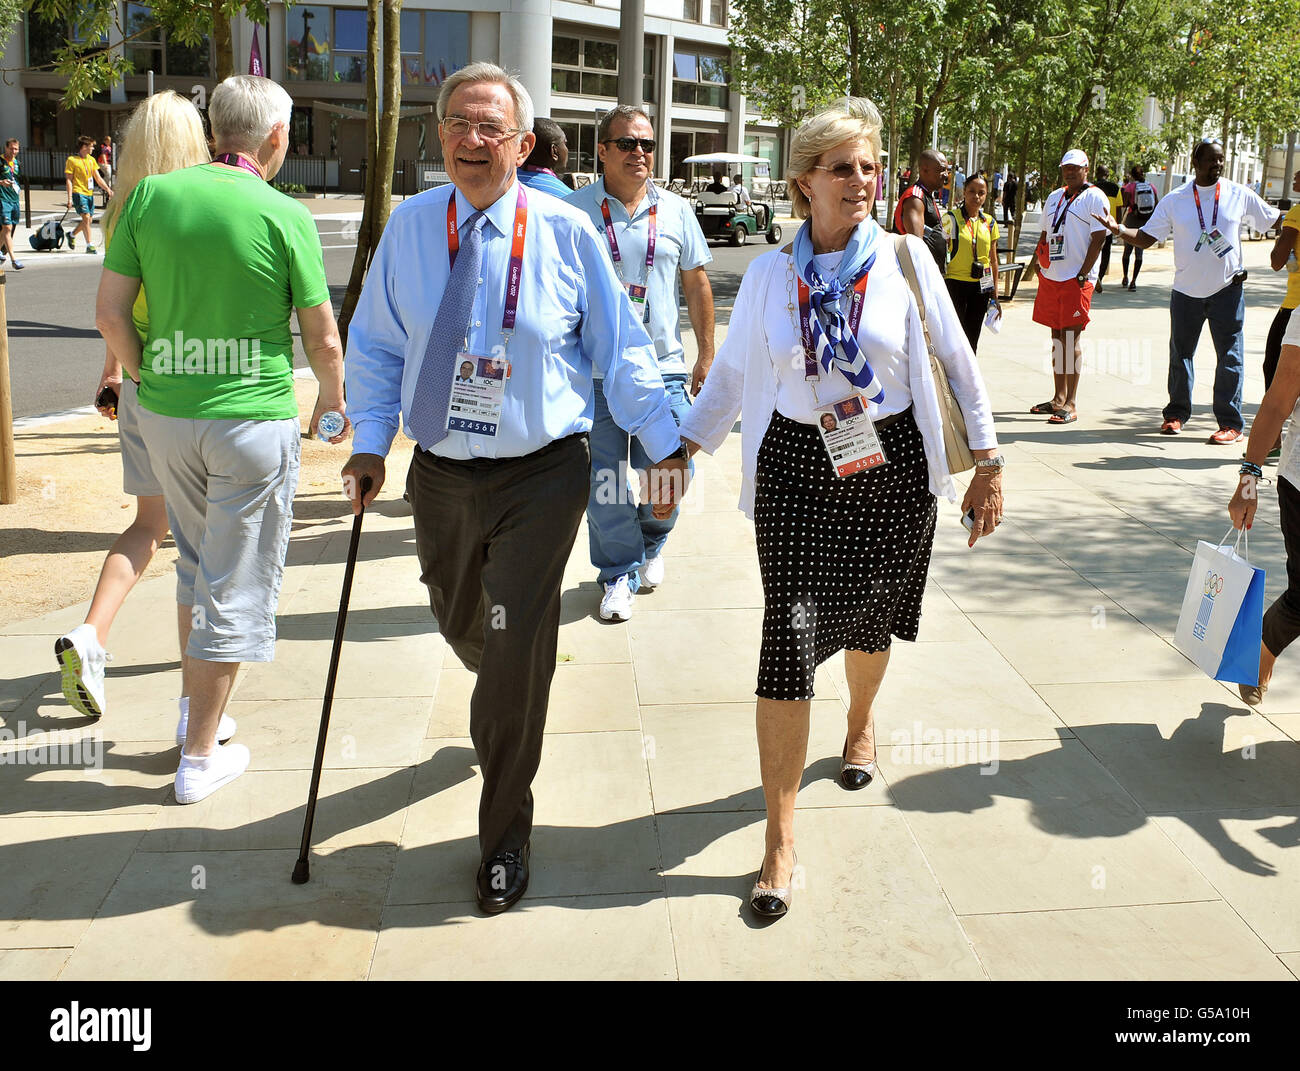 King Constantine of Greece with his wife Queen Anne Marie stroll hand in hand through the Athletes Village at the London 2012 Olympic Games site in Stratford, east London. Stock Photo